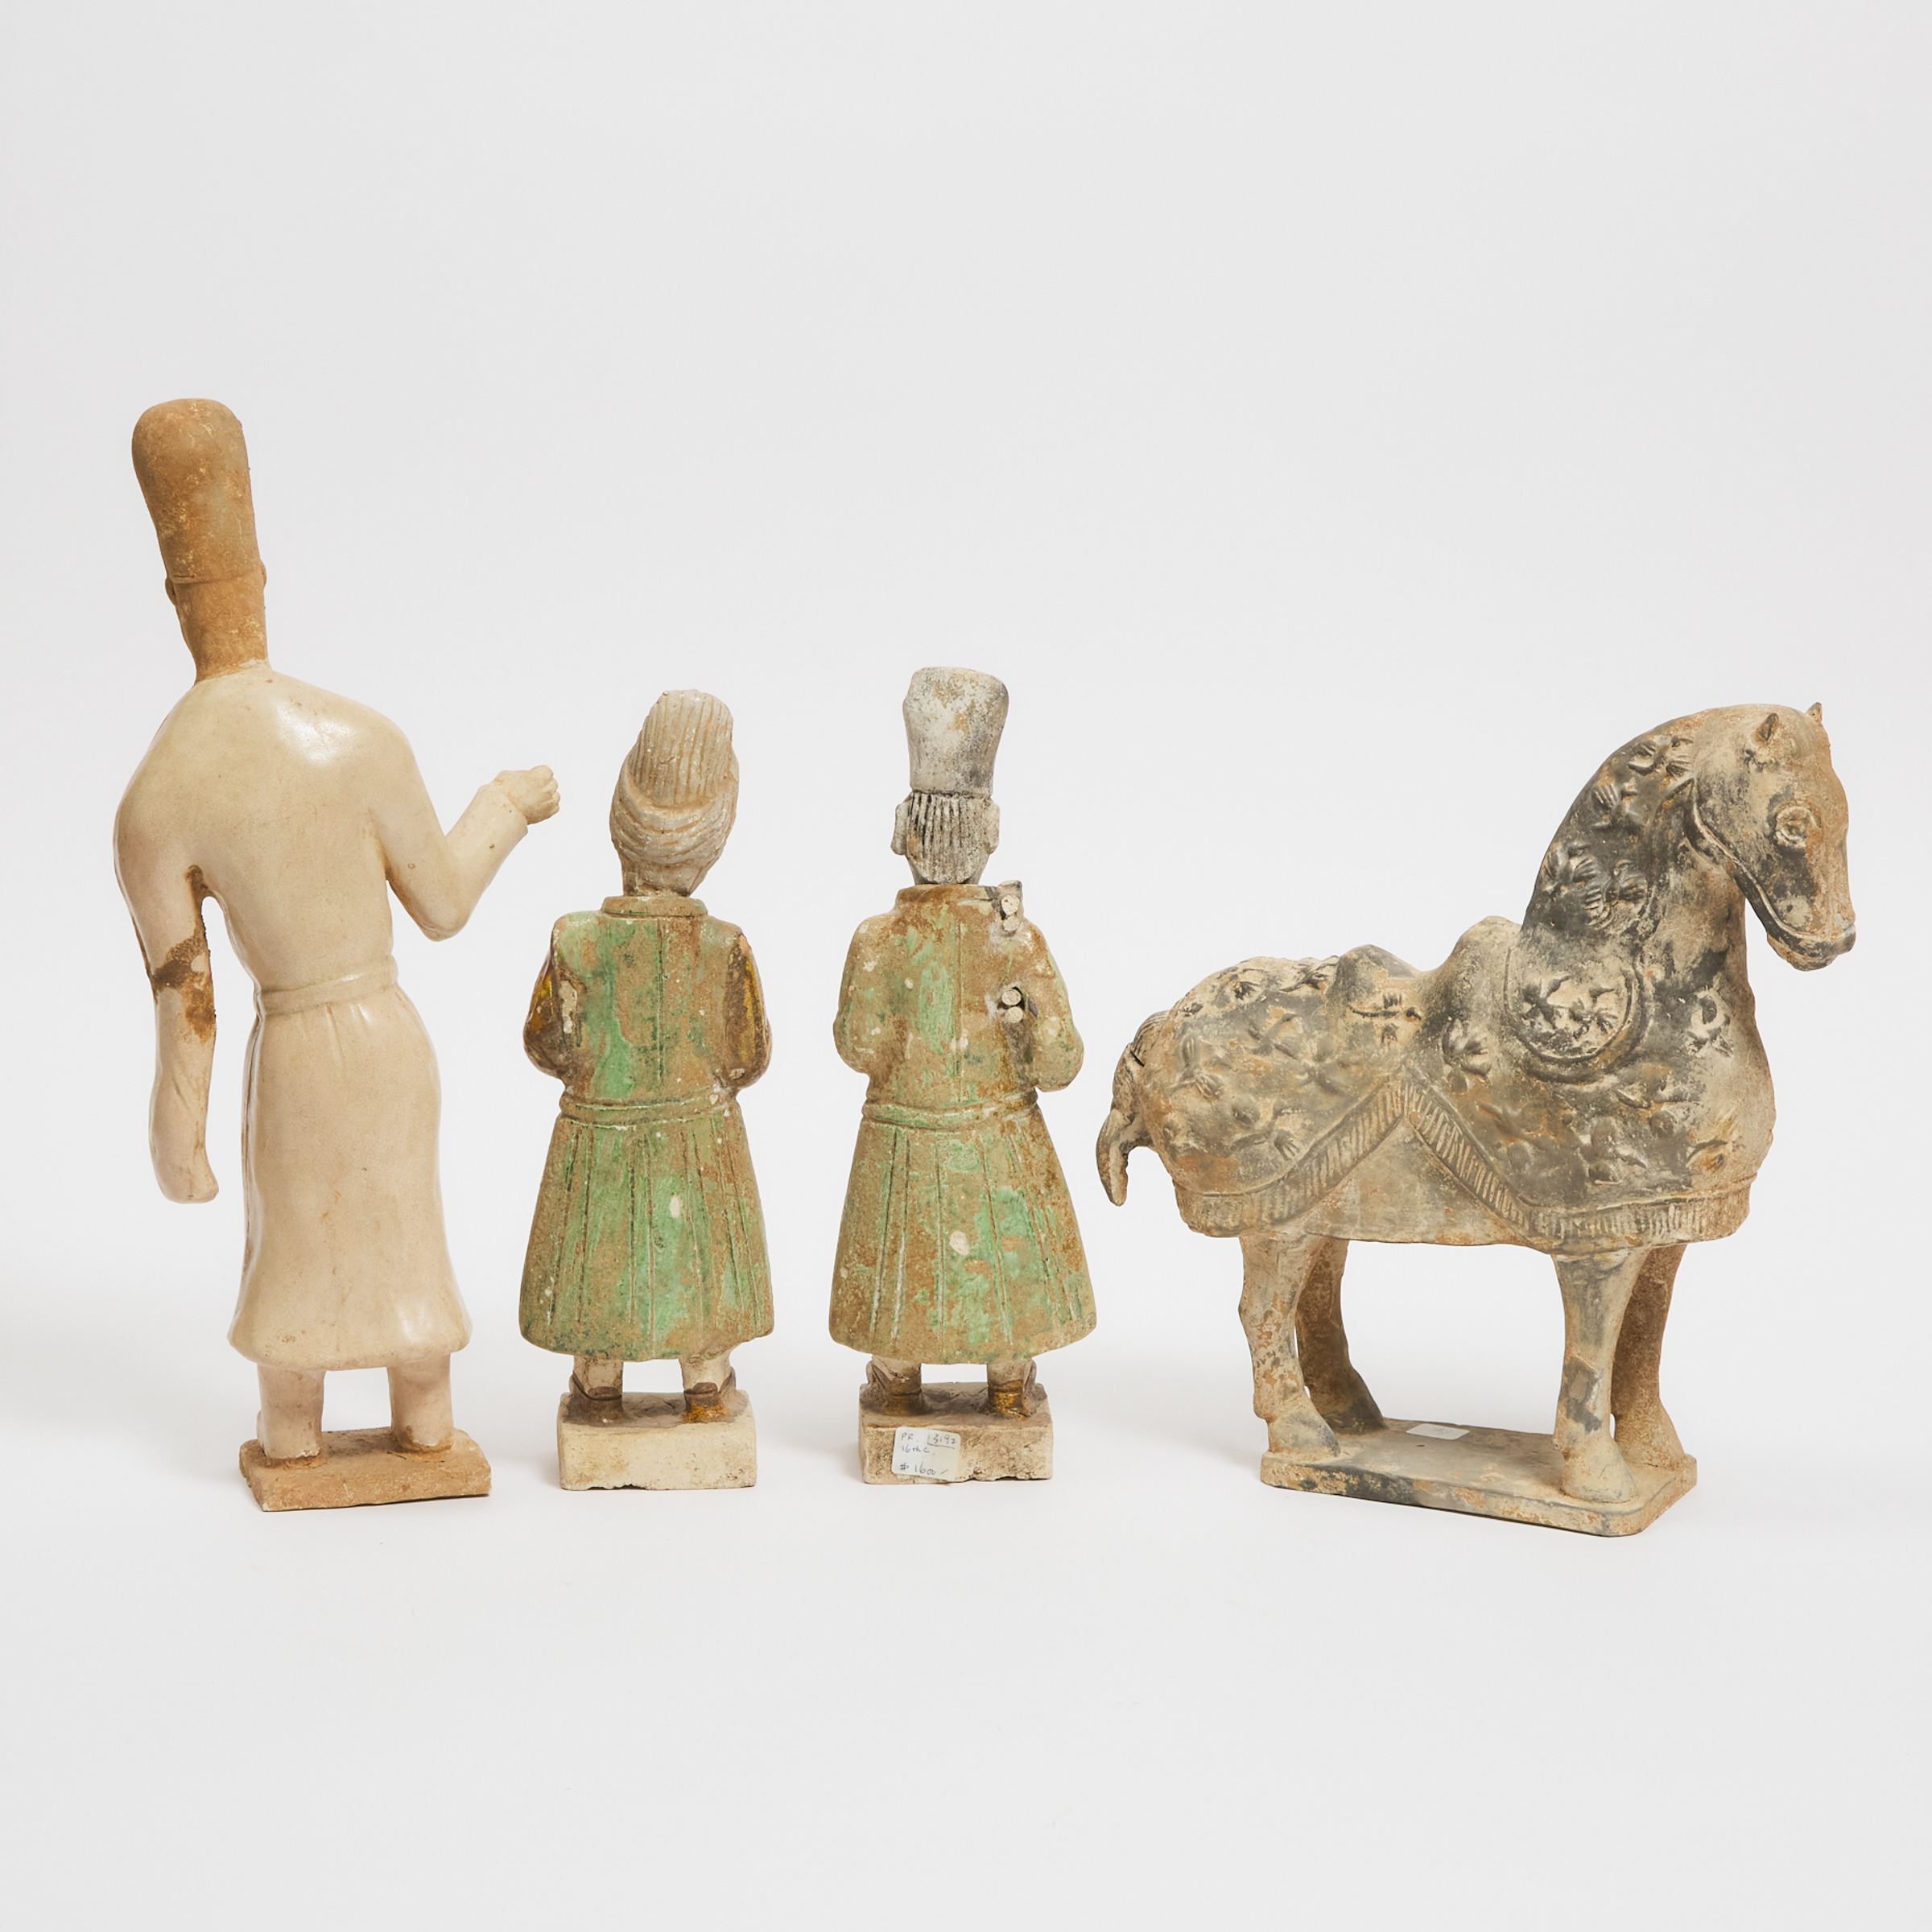 A Group of Four Painted Pottery Figures and Horse, Han Dynasty and Later